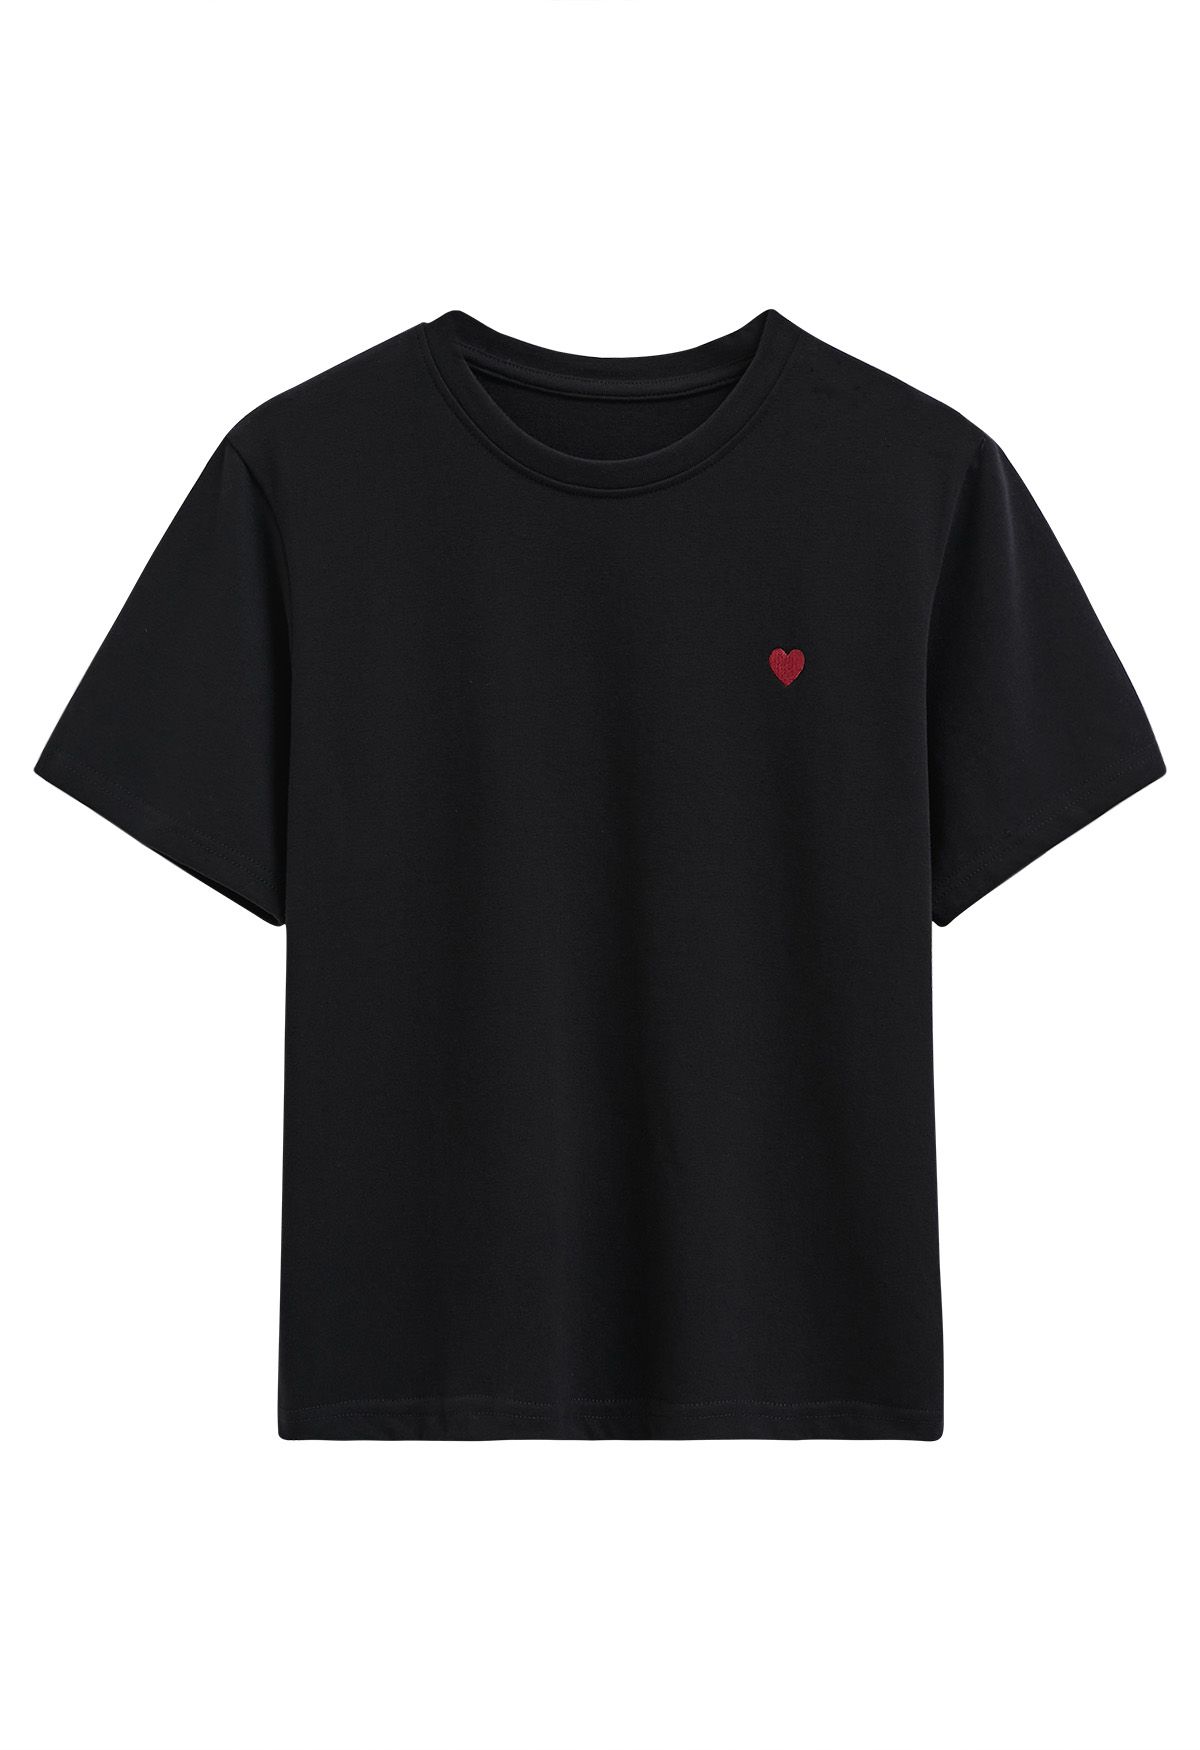 Cute Embroidered Heart Pattern T-Shirt in Black